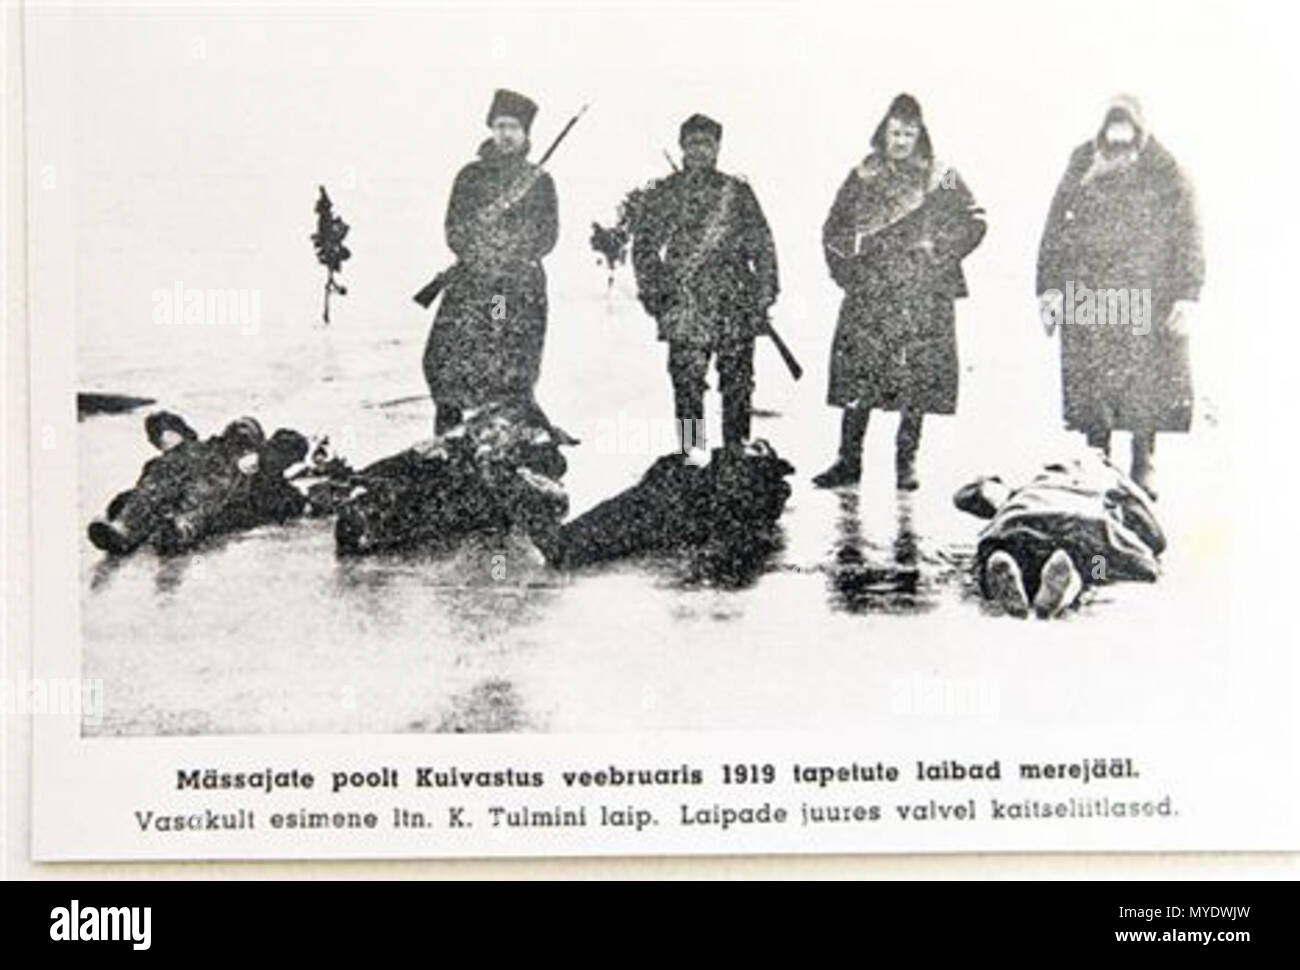 . English: Dead Estonian soldiers killed by rebels in Muhu, February 16 1919 during the first days of Saarenmaa rebellion. Bodies guarded by Kaitseliit paramilitary soldiers. 25 January 2012. Unknown 169 Estonian soldiers killed by rebels in Saarenmaa Stock Photo